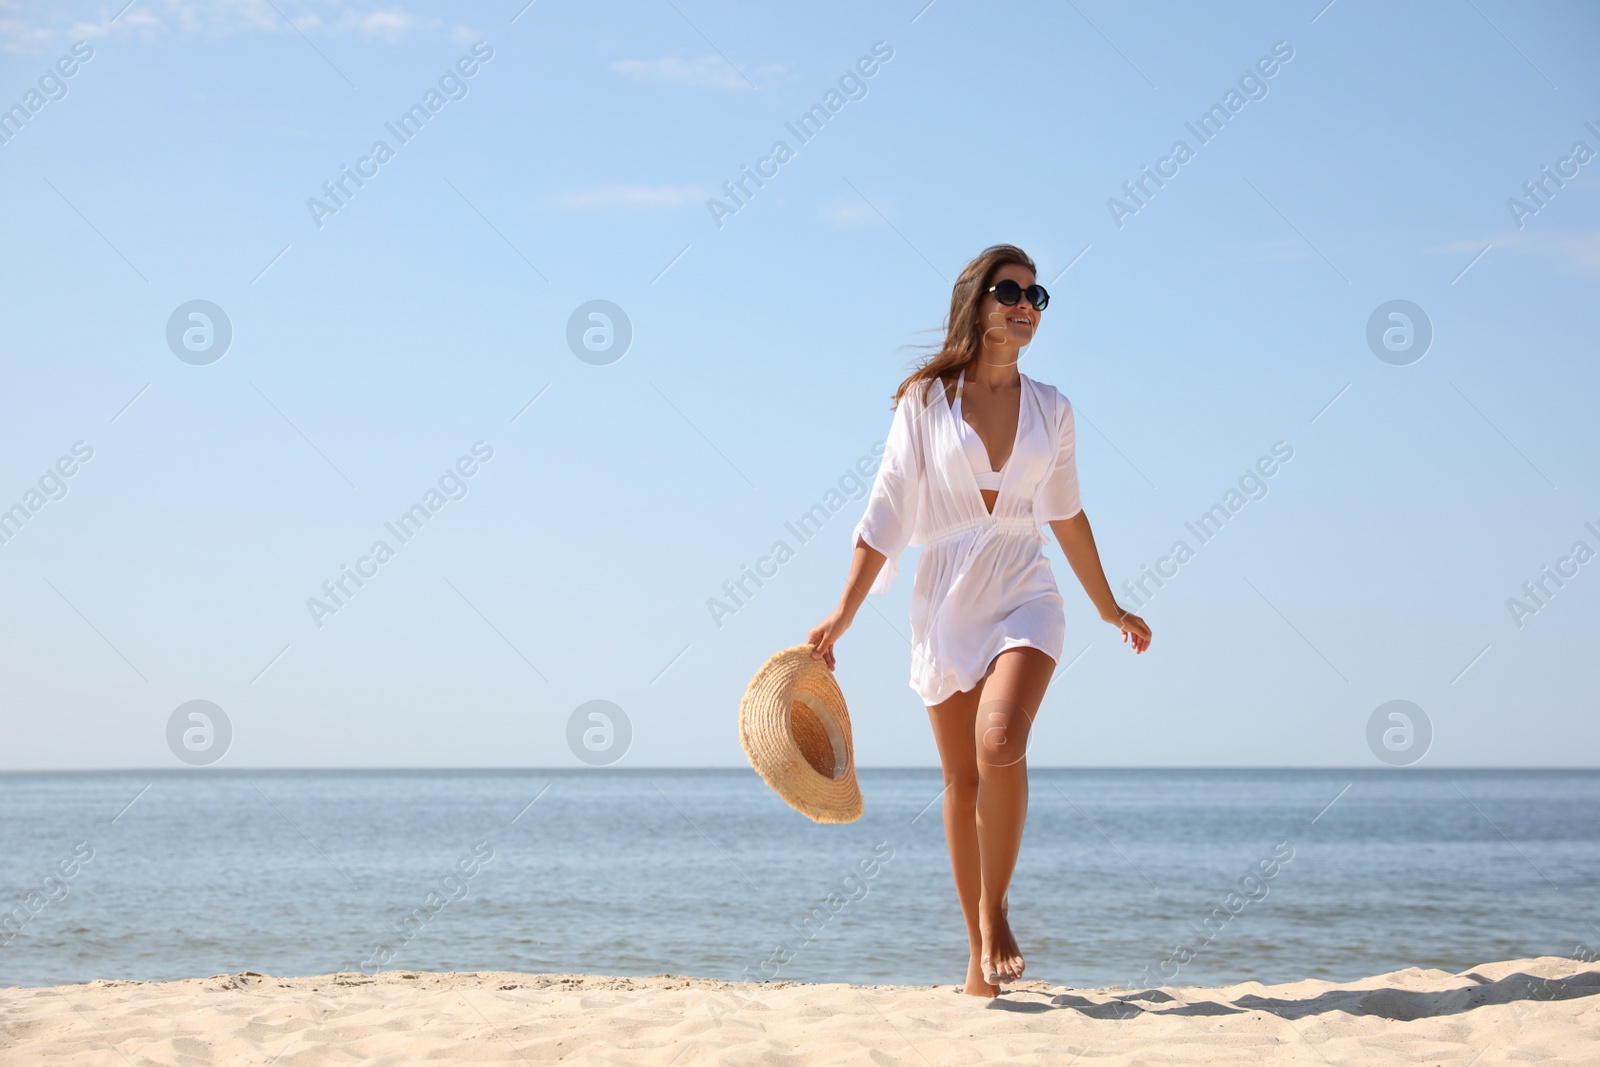 Photo of Young woman with beautiful body on sandy beach. Space for text